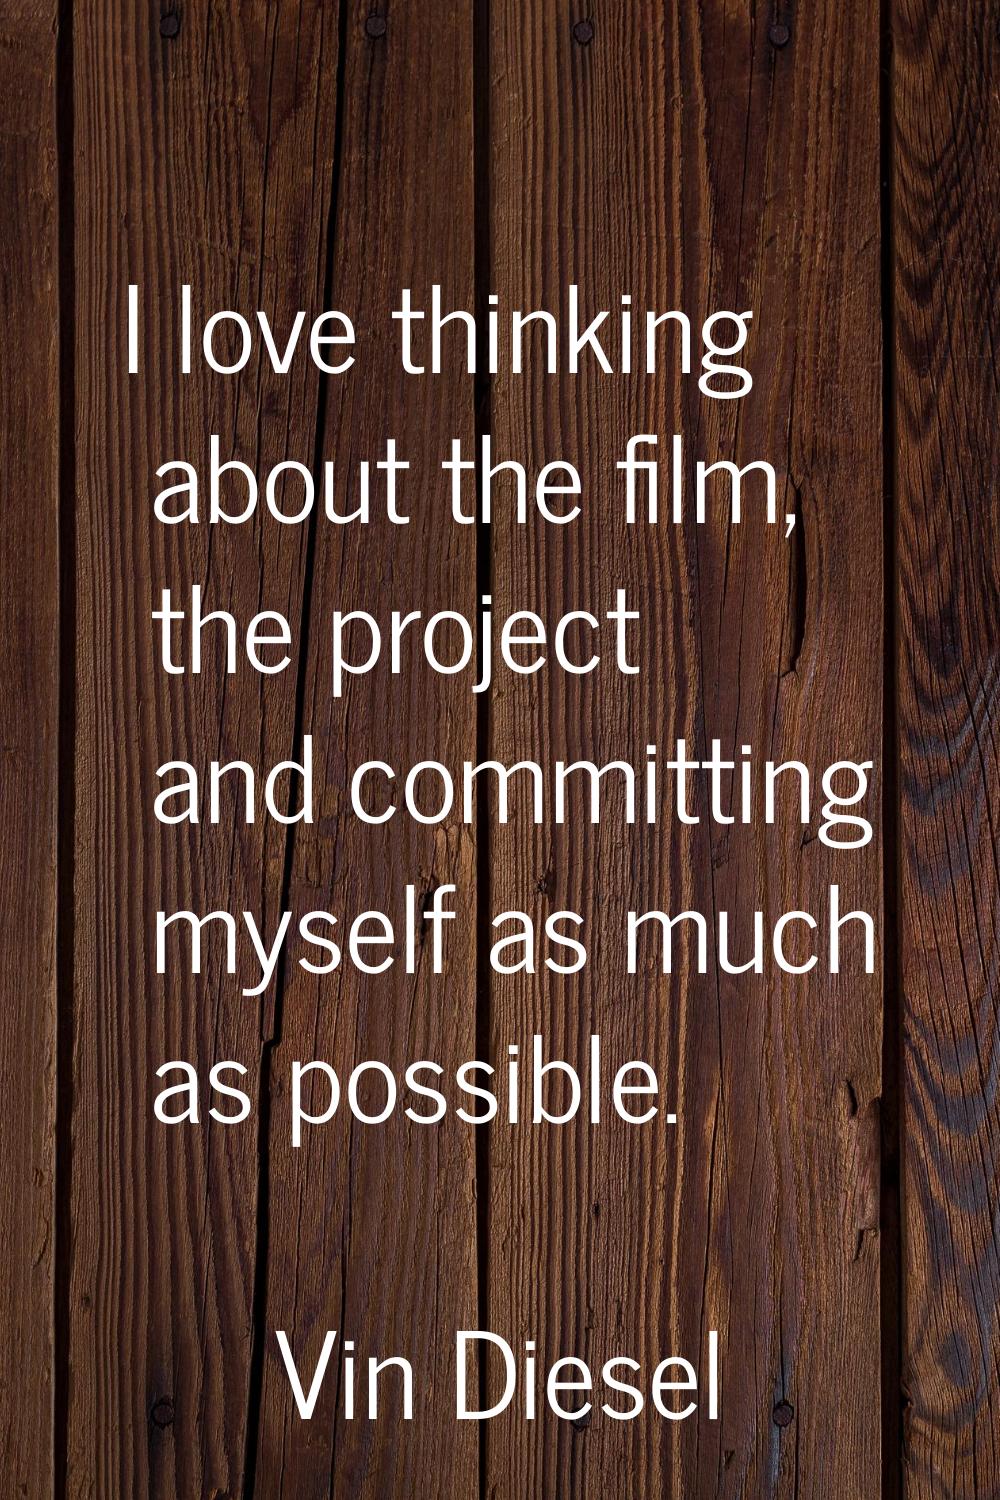 I love thinking about the film, the project and committing myself as much as possible.